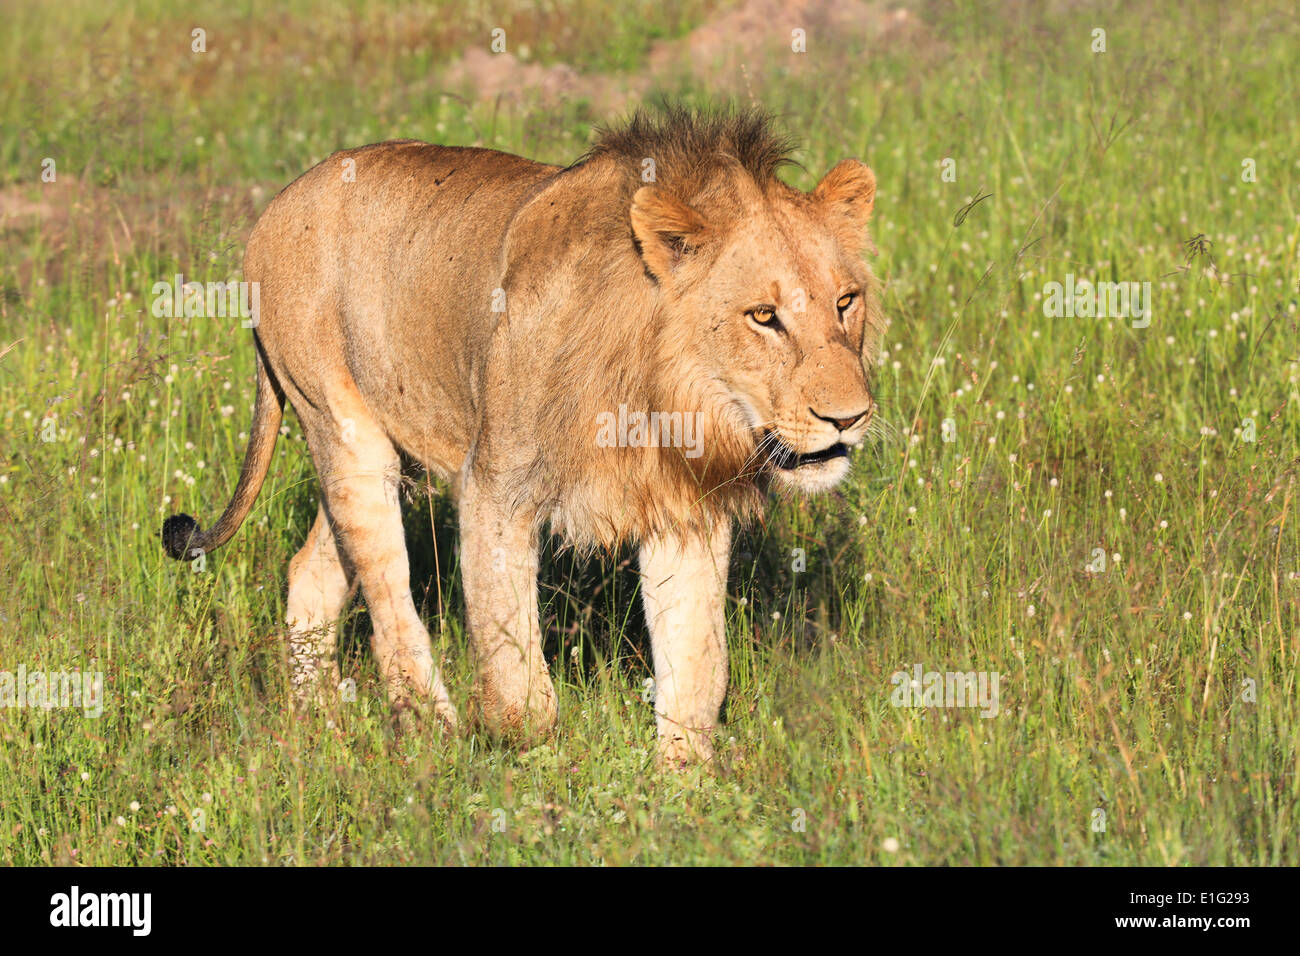 Young lion walking through low grass at the Sabi Sands Game Reserve, Kruger National Park, South Africa. Stock Photo